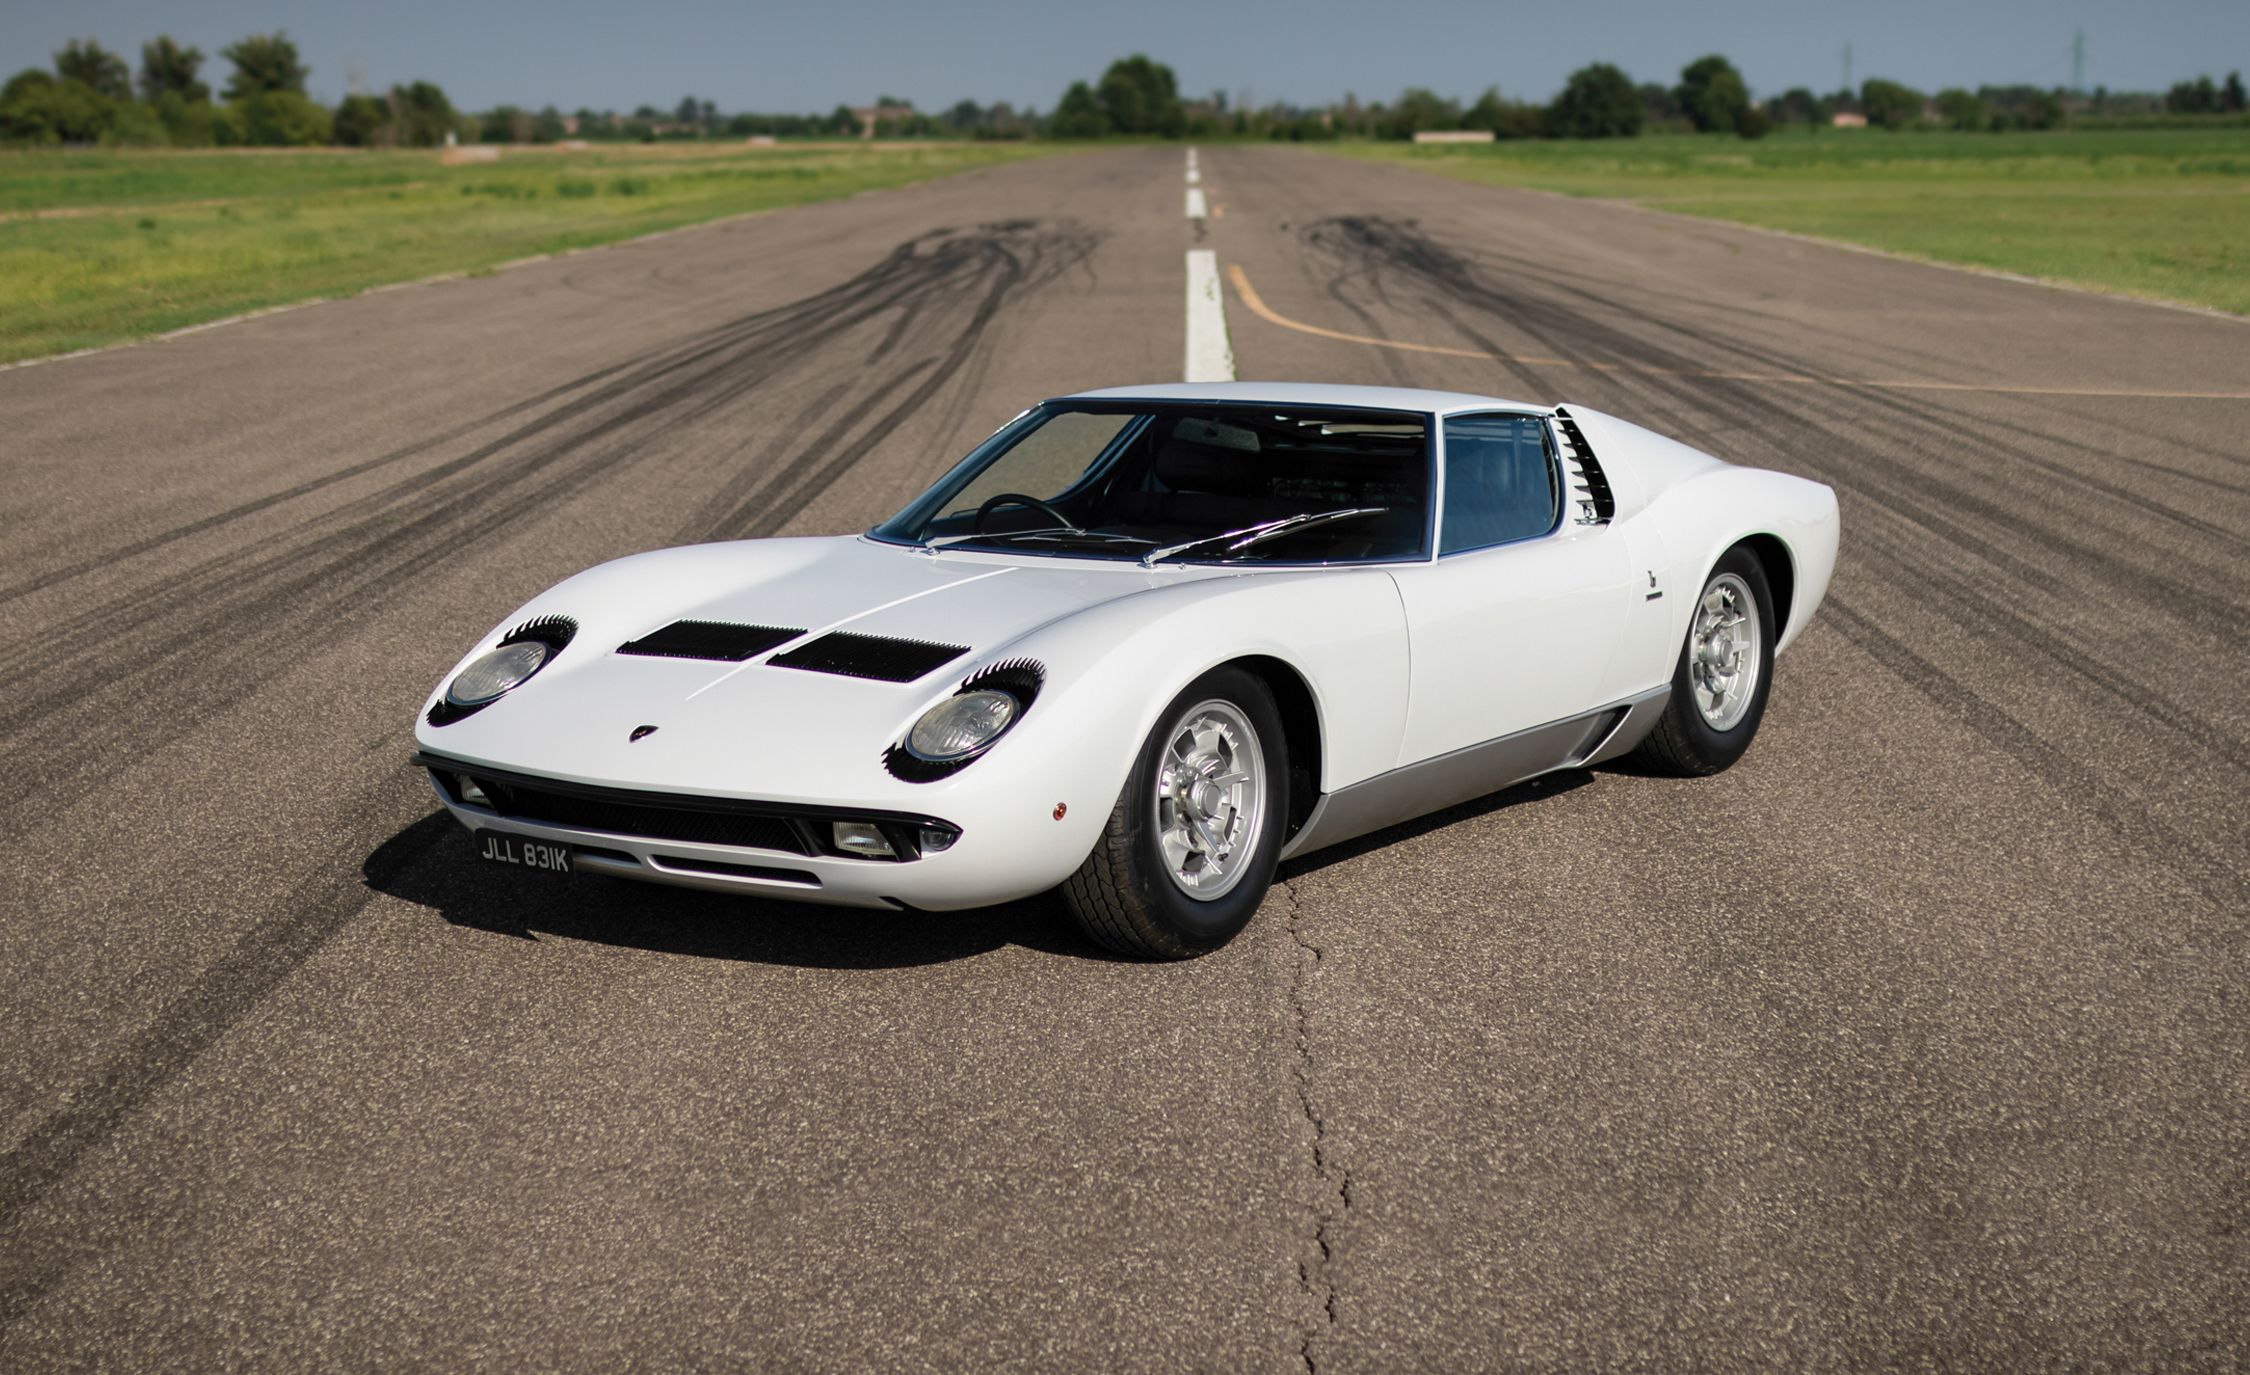 Lamborghini Miura for Sale in U.K. Was First Owned by Rod ...